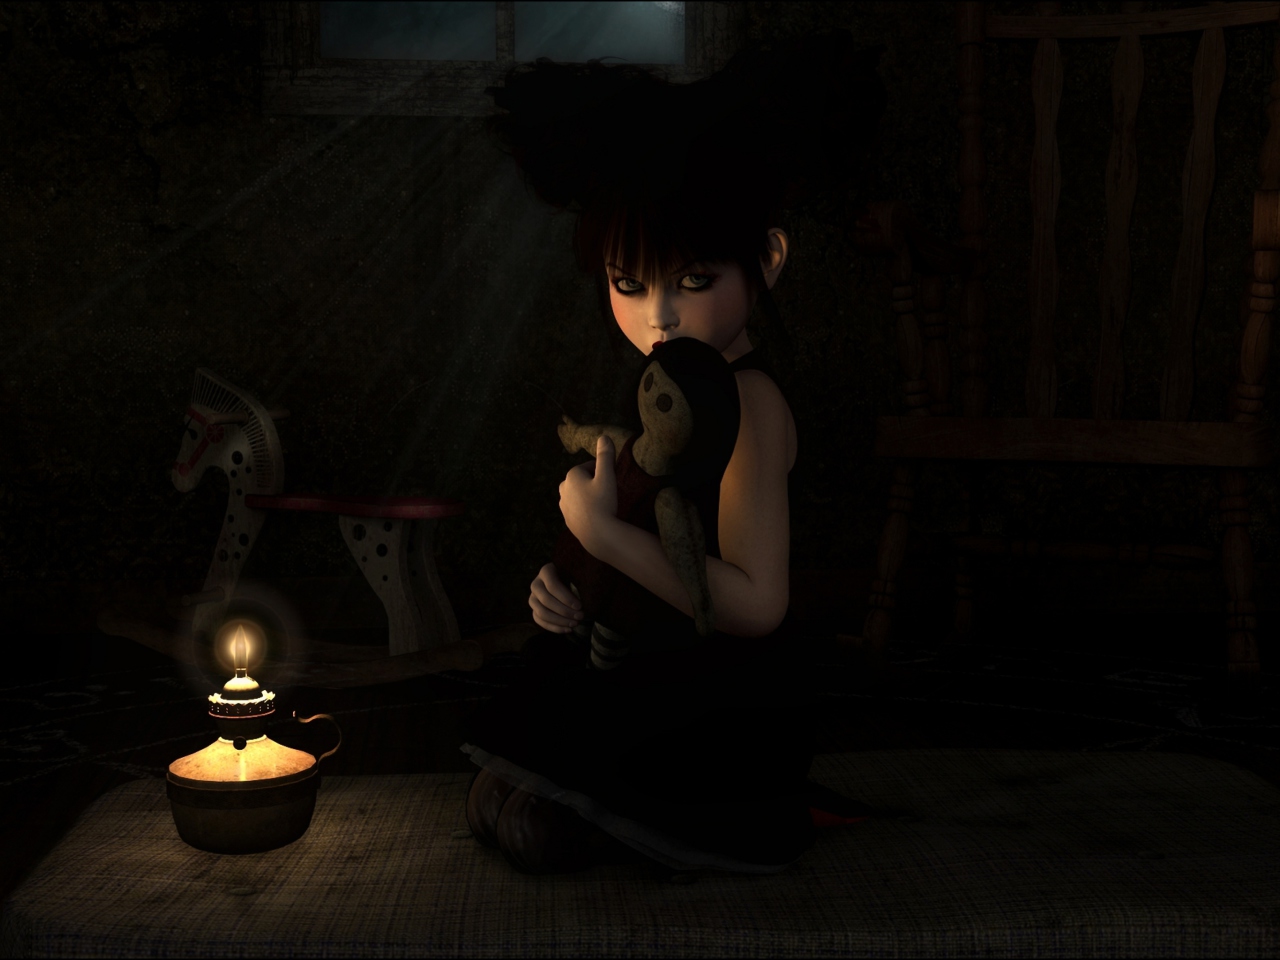 Das Lonely Child With Toy Wallpaper 1280x960